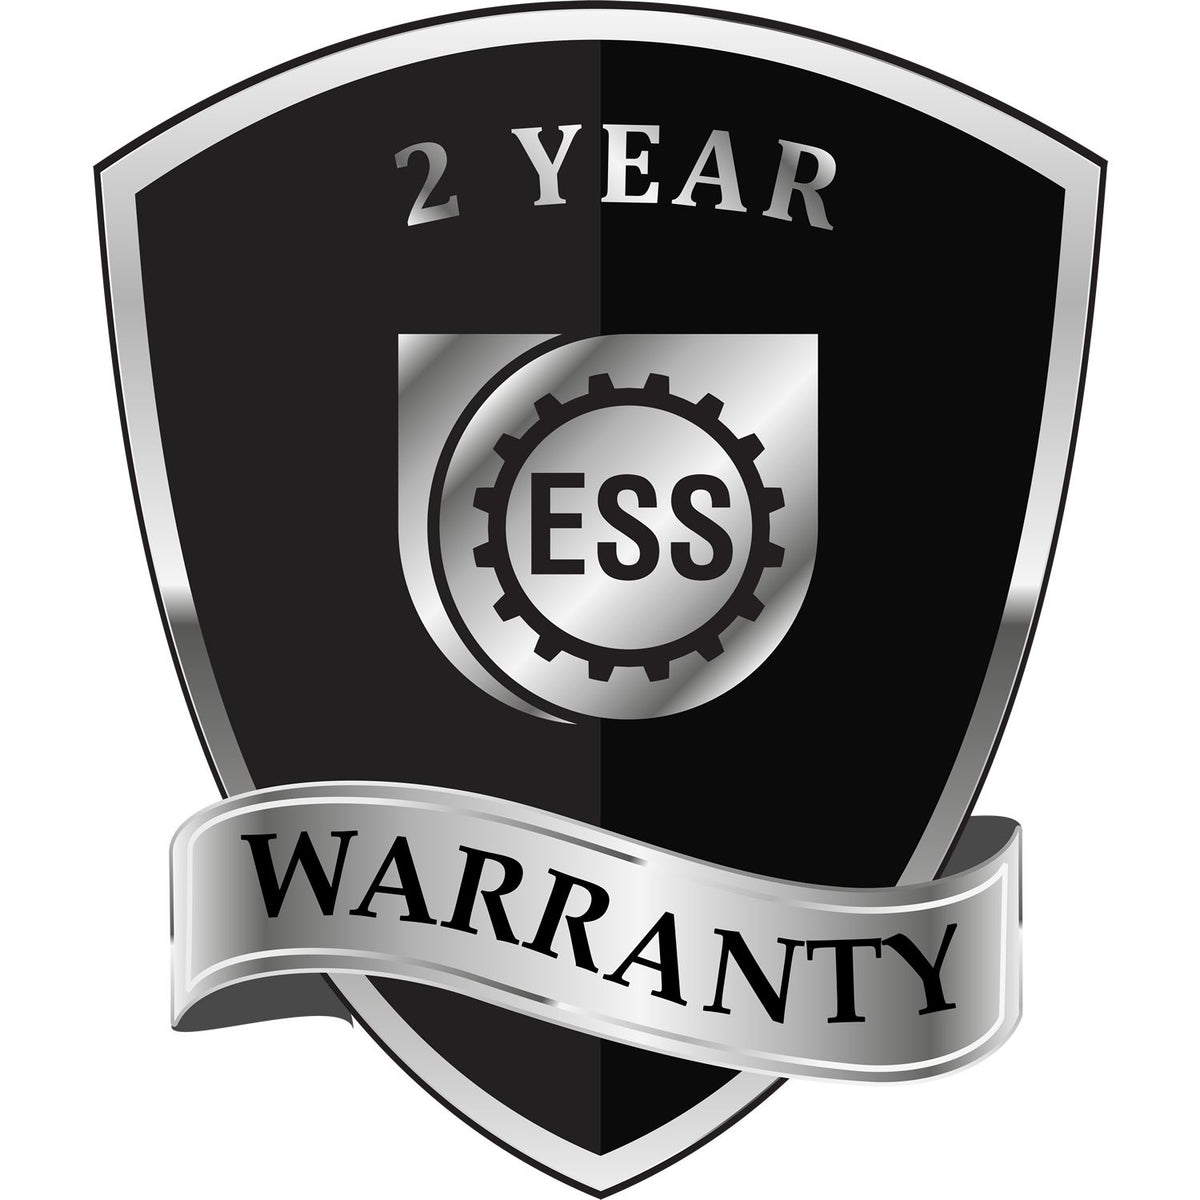 A badge or emblem showing a warranty icon for the Long Reach Alabama PE Seal